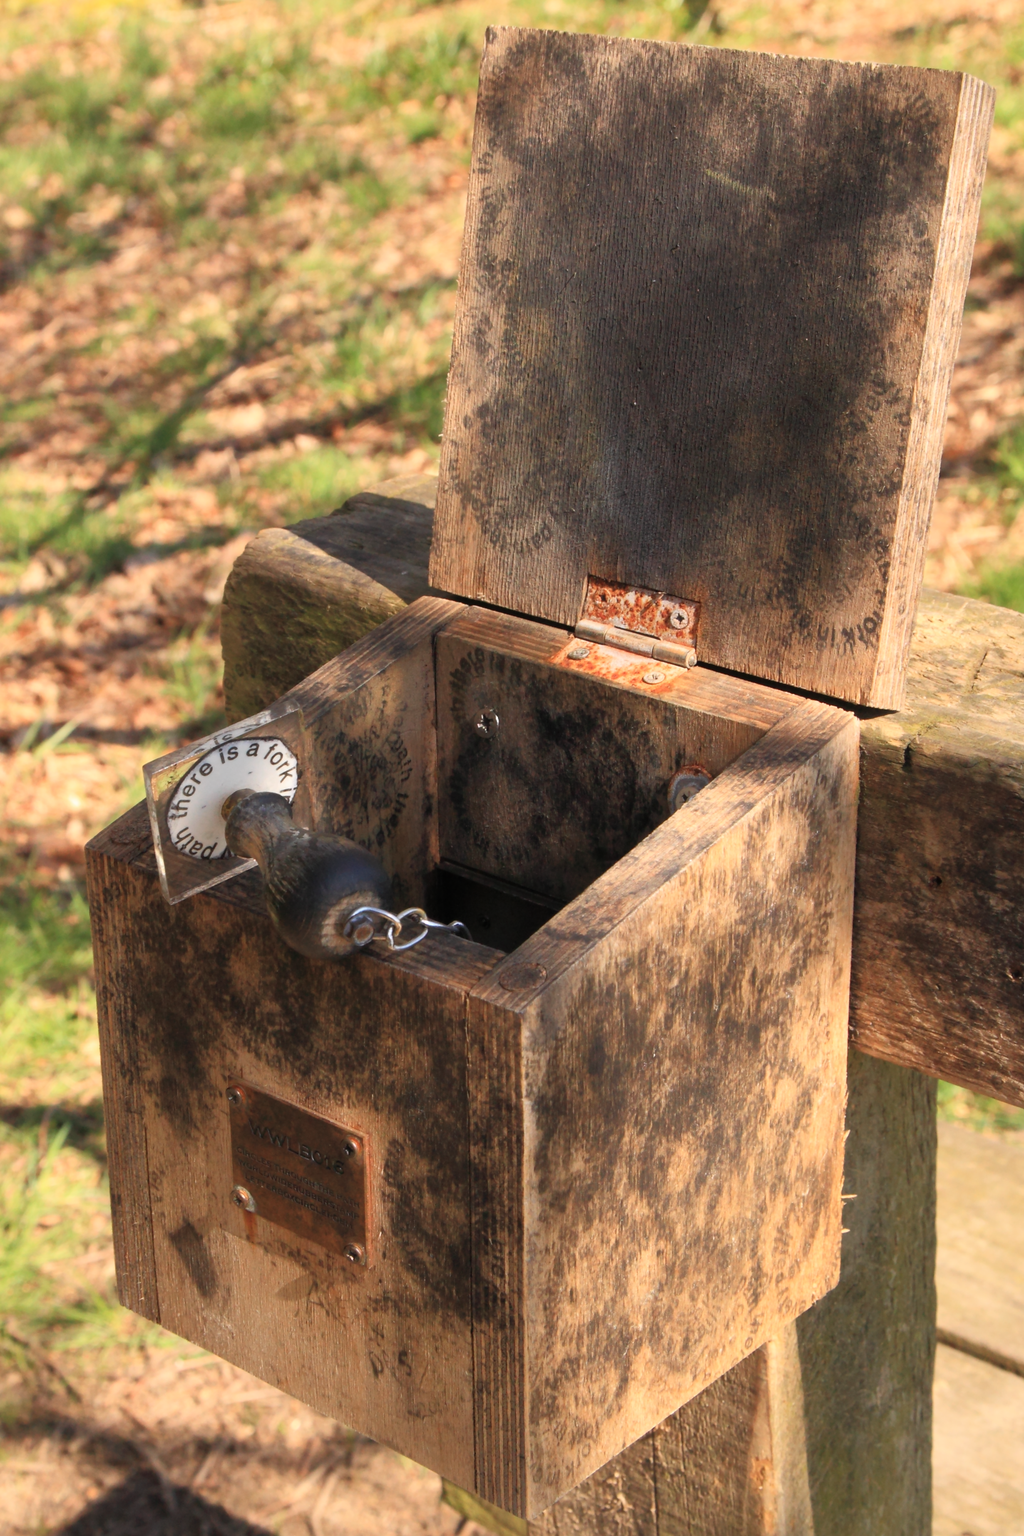 Example of a Letterbox - Photo by QuentinUK